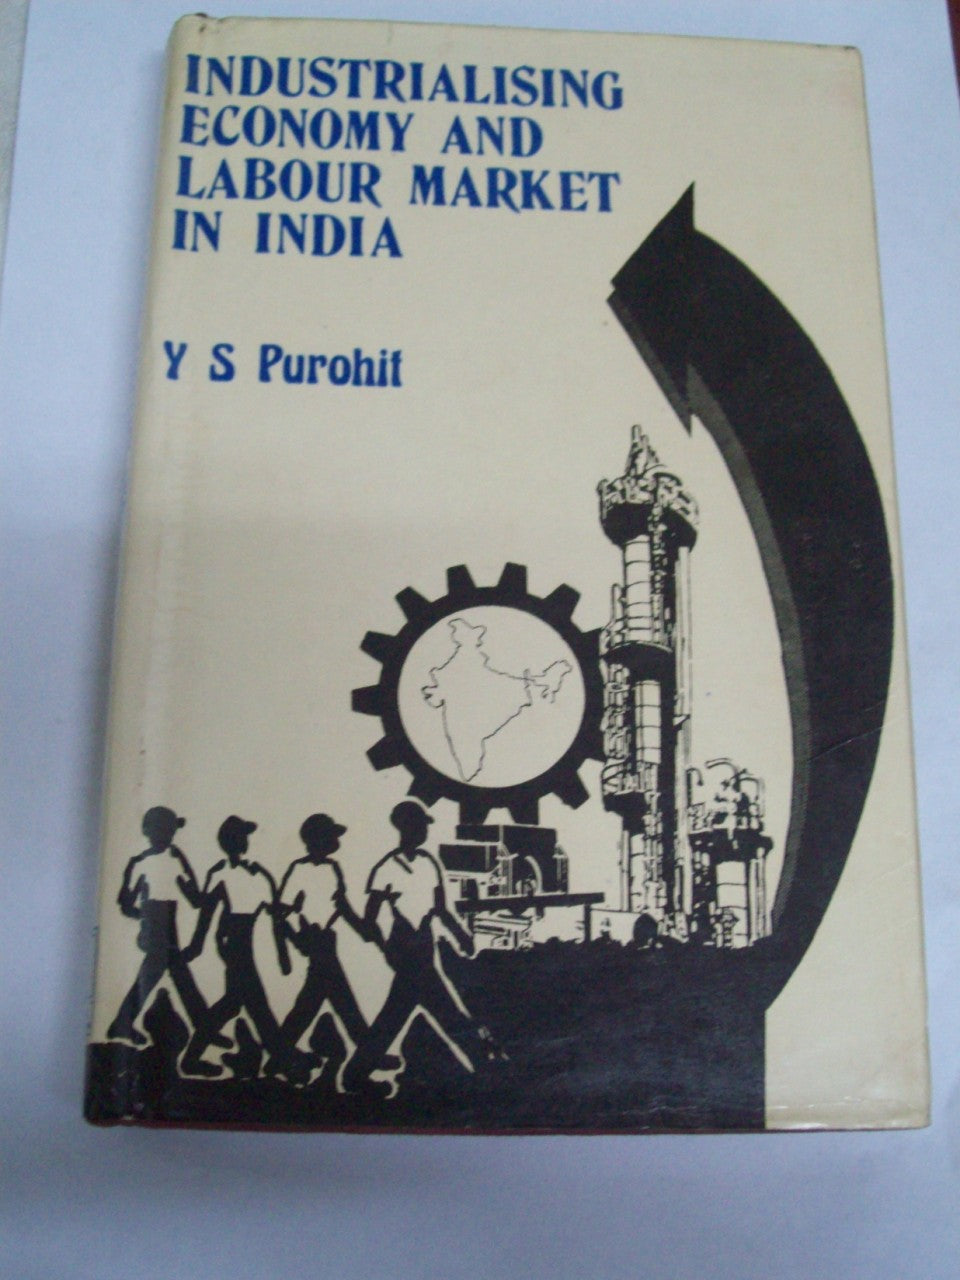 Industrialising Economy And Labour Market In India